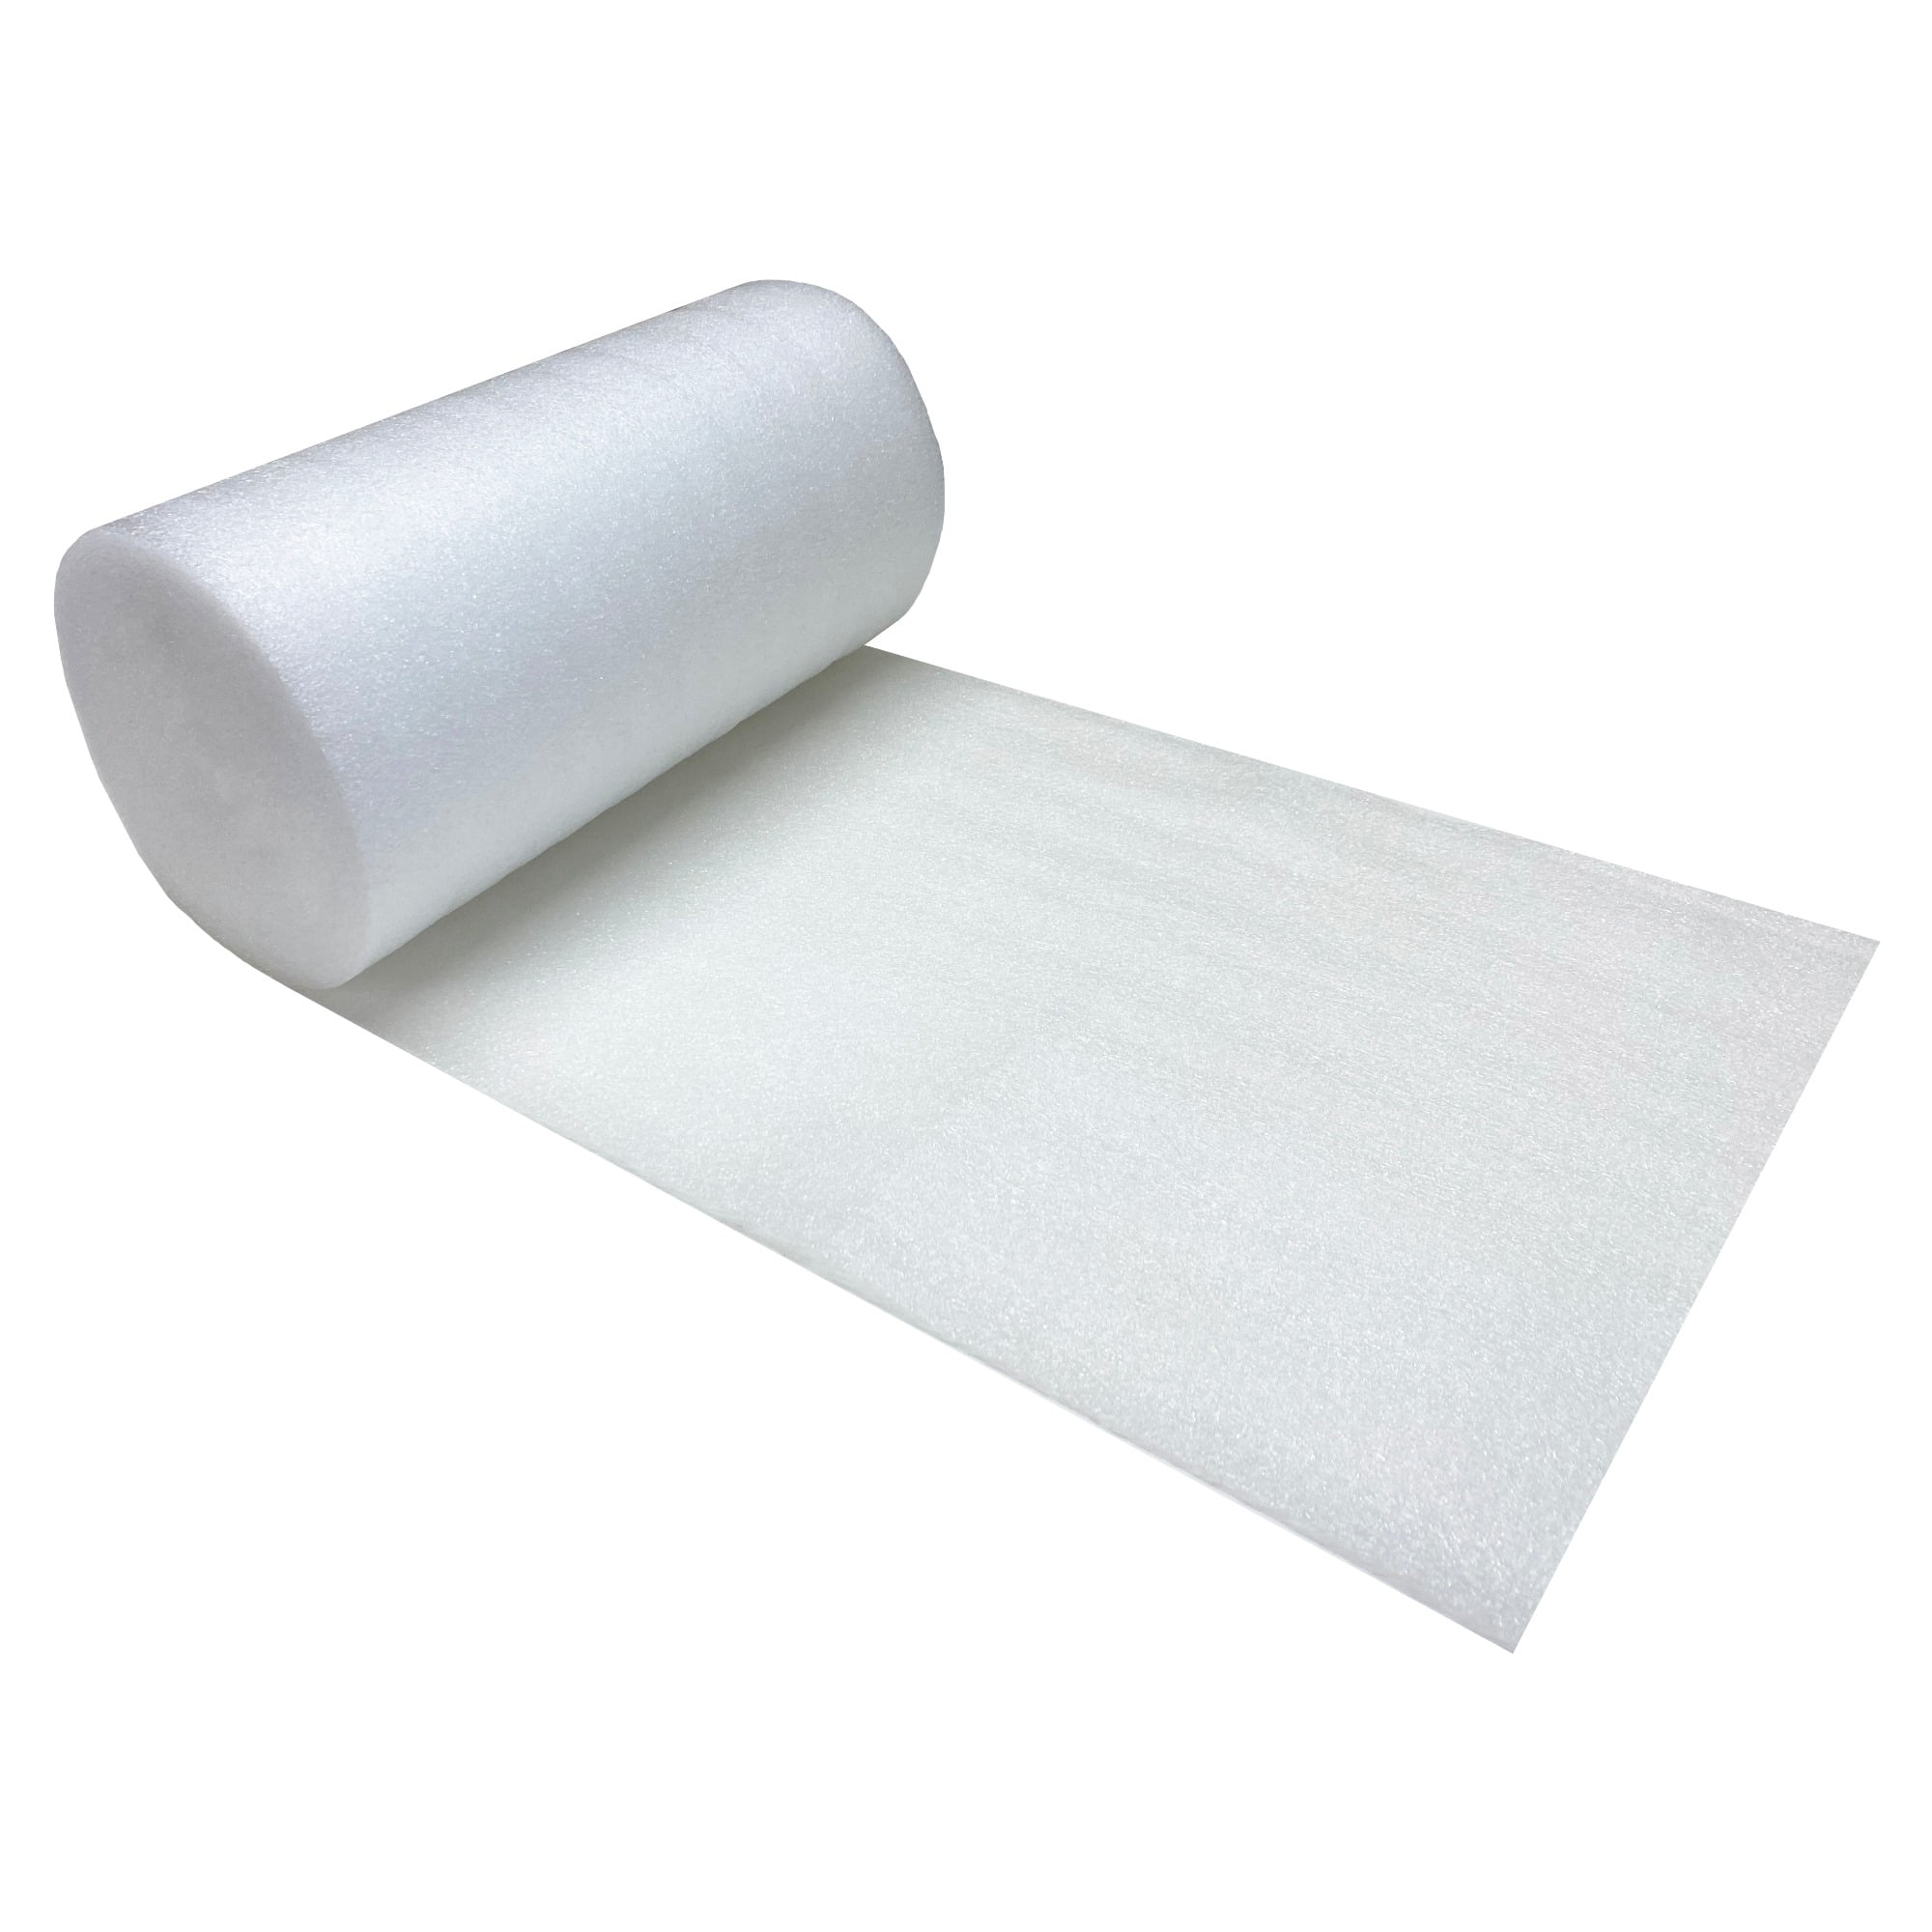 ValueMailers Perforated Dish Foam Roll 12 Wide x 700 Long x 1/16 Thick Perforated Every 12 